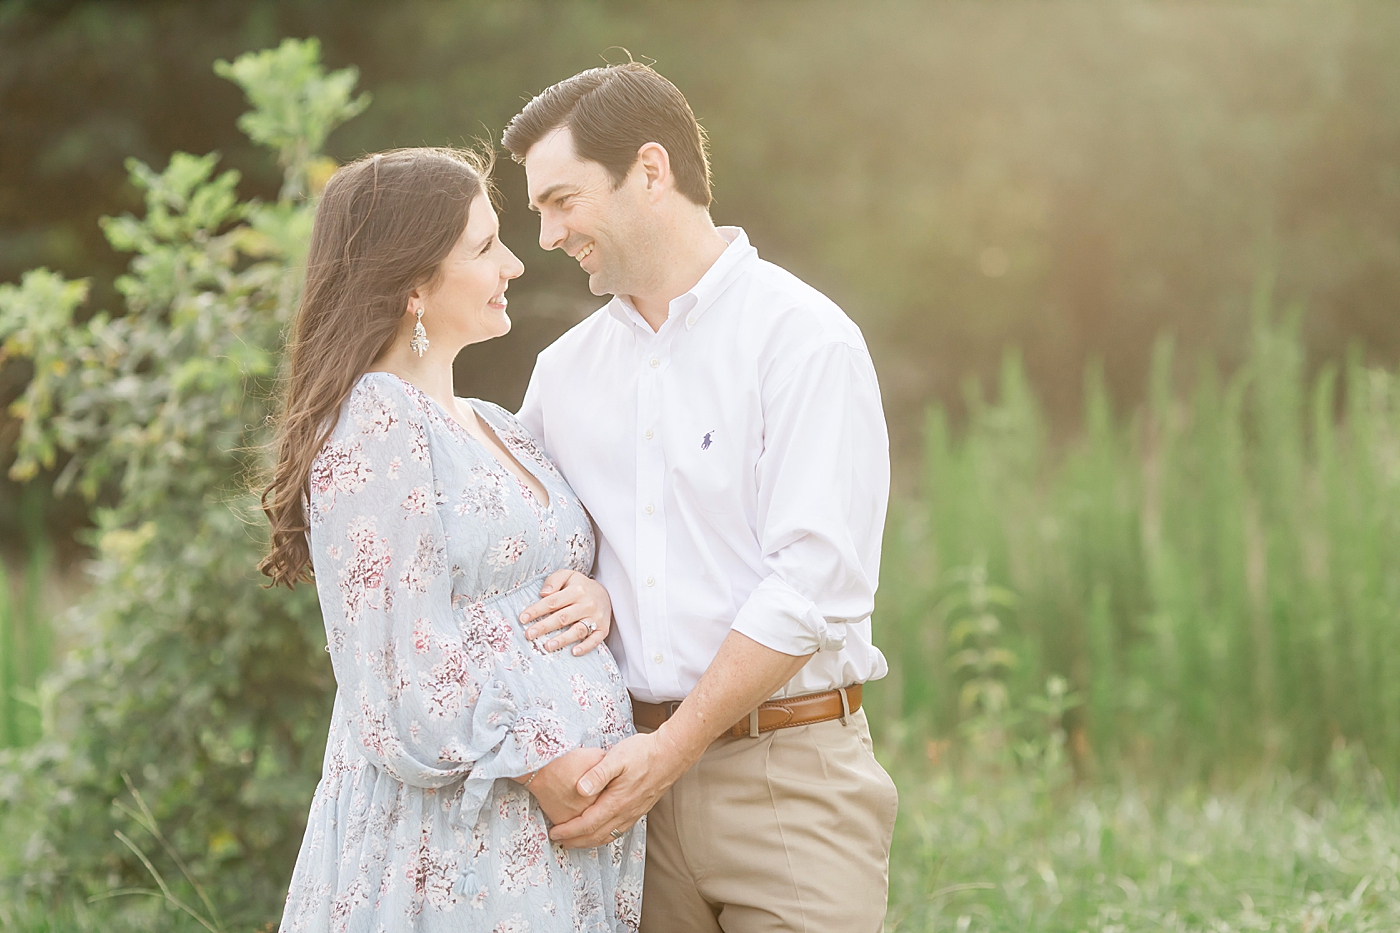 Sunset session to celebrate pregnancy with first time parents. Photo by Fresh Light Photography.